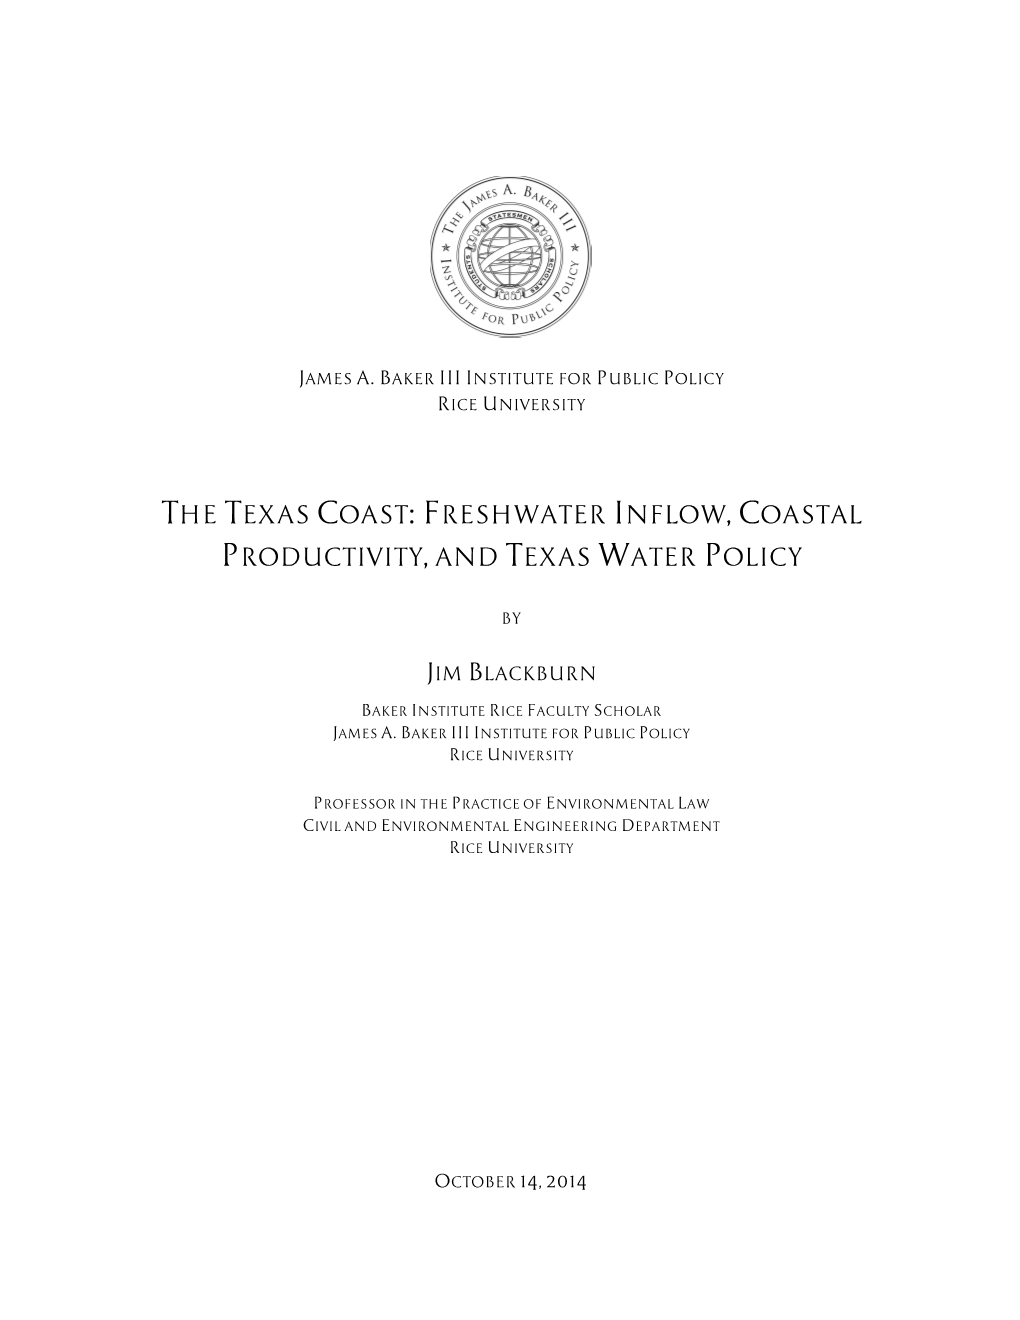 The Texas Coast: Freshwater Inflow, Coastal Productivity, and Texas Water Policy